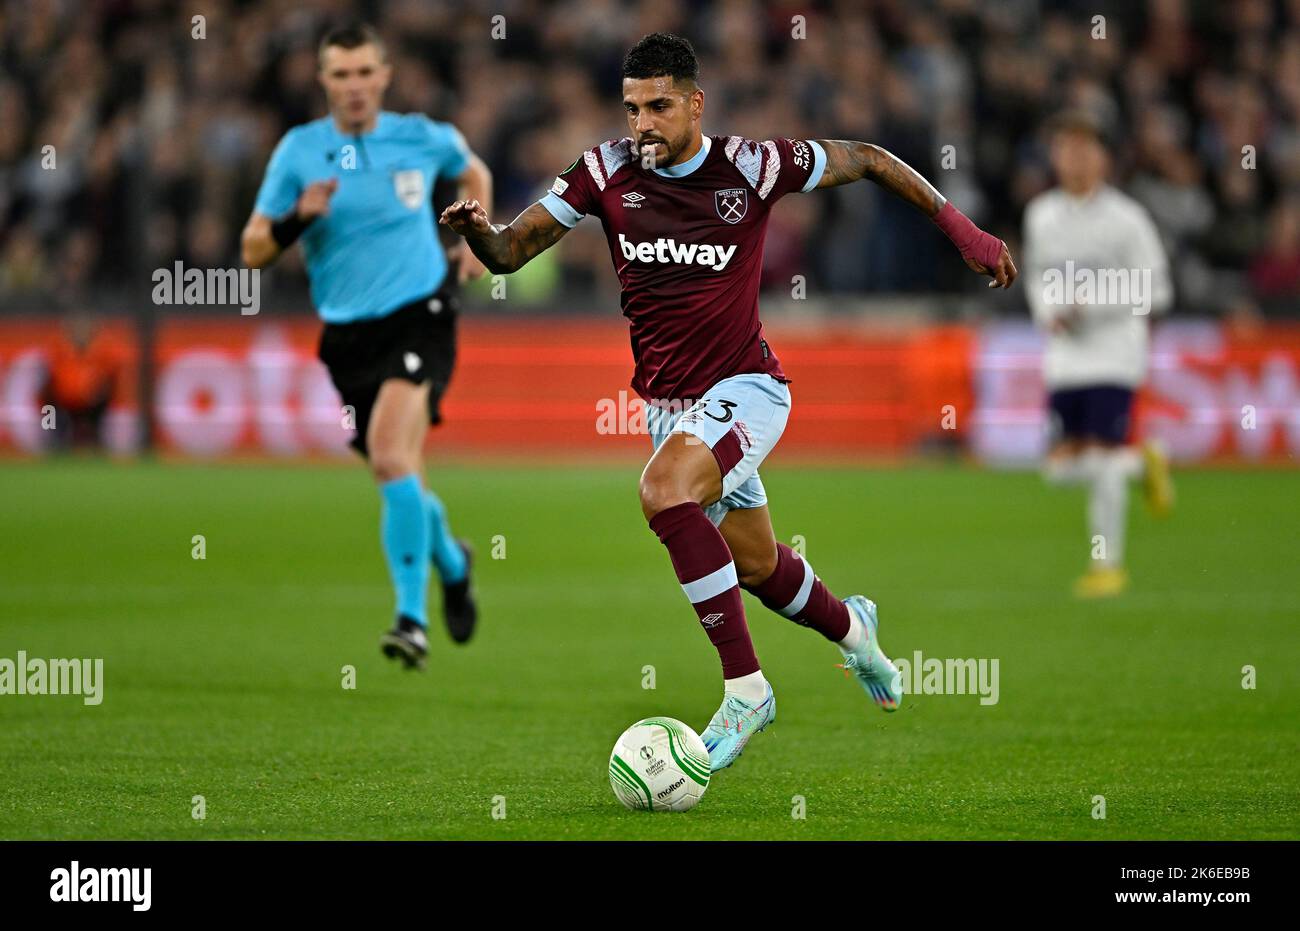 London, UK. 13th Oct, 2022. London UK 13th October 2022Emerson (West Ham) during the West Ham vs RSC Anderlecht Europa Conference League (Group B) match at the London Stadium Stratford. Credit: MARTIN DALTON/Alamy Live News Stock Photo